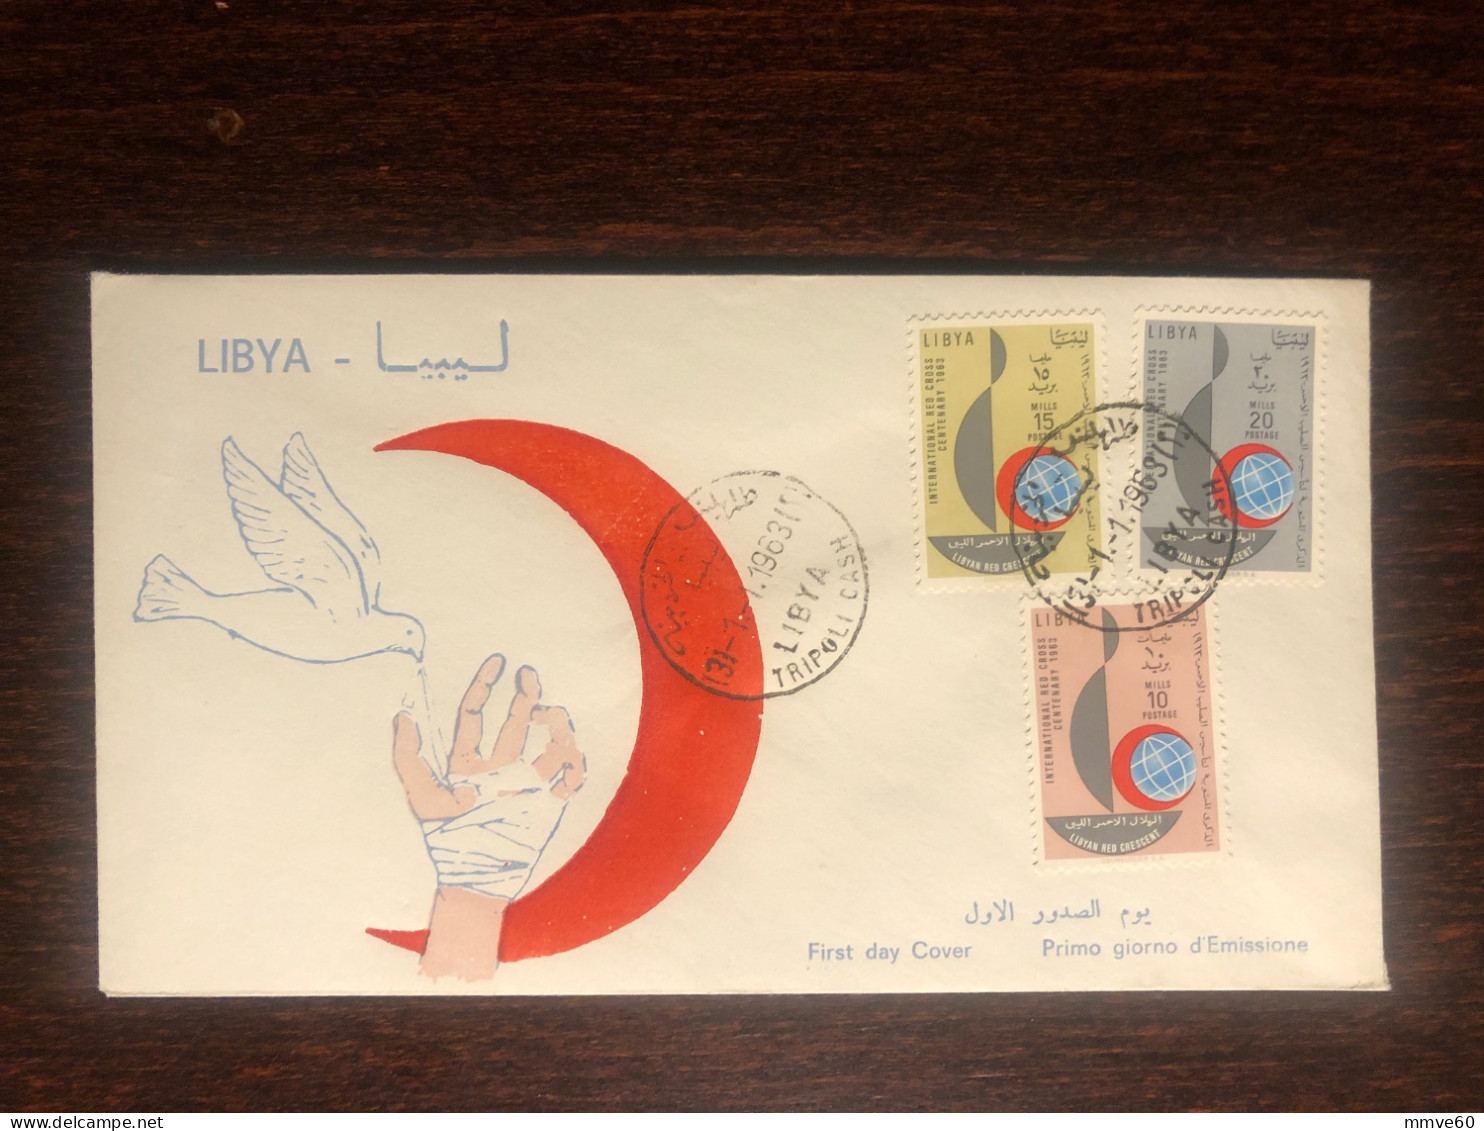 LIBYA  FDC COVER 1963 YEAR RED CRESCENT RED CROSS HEALTH MEDICINE STAMPS - Libya